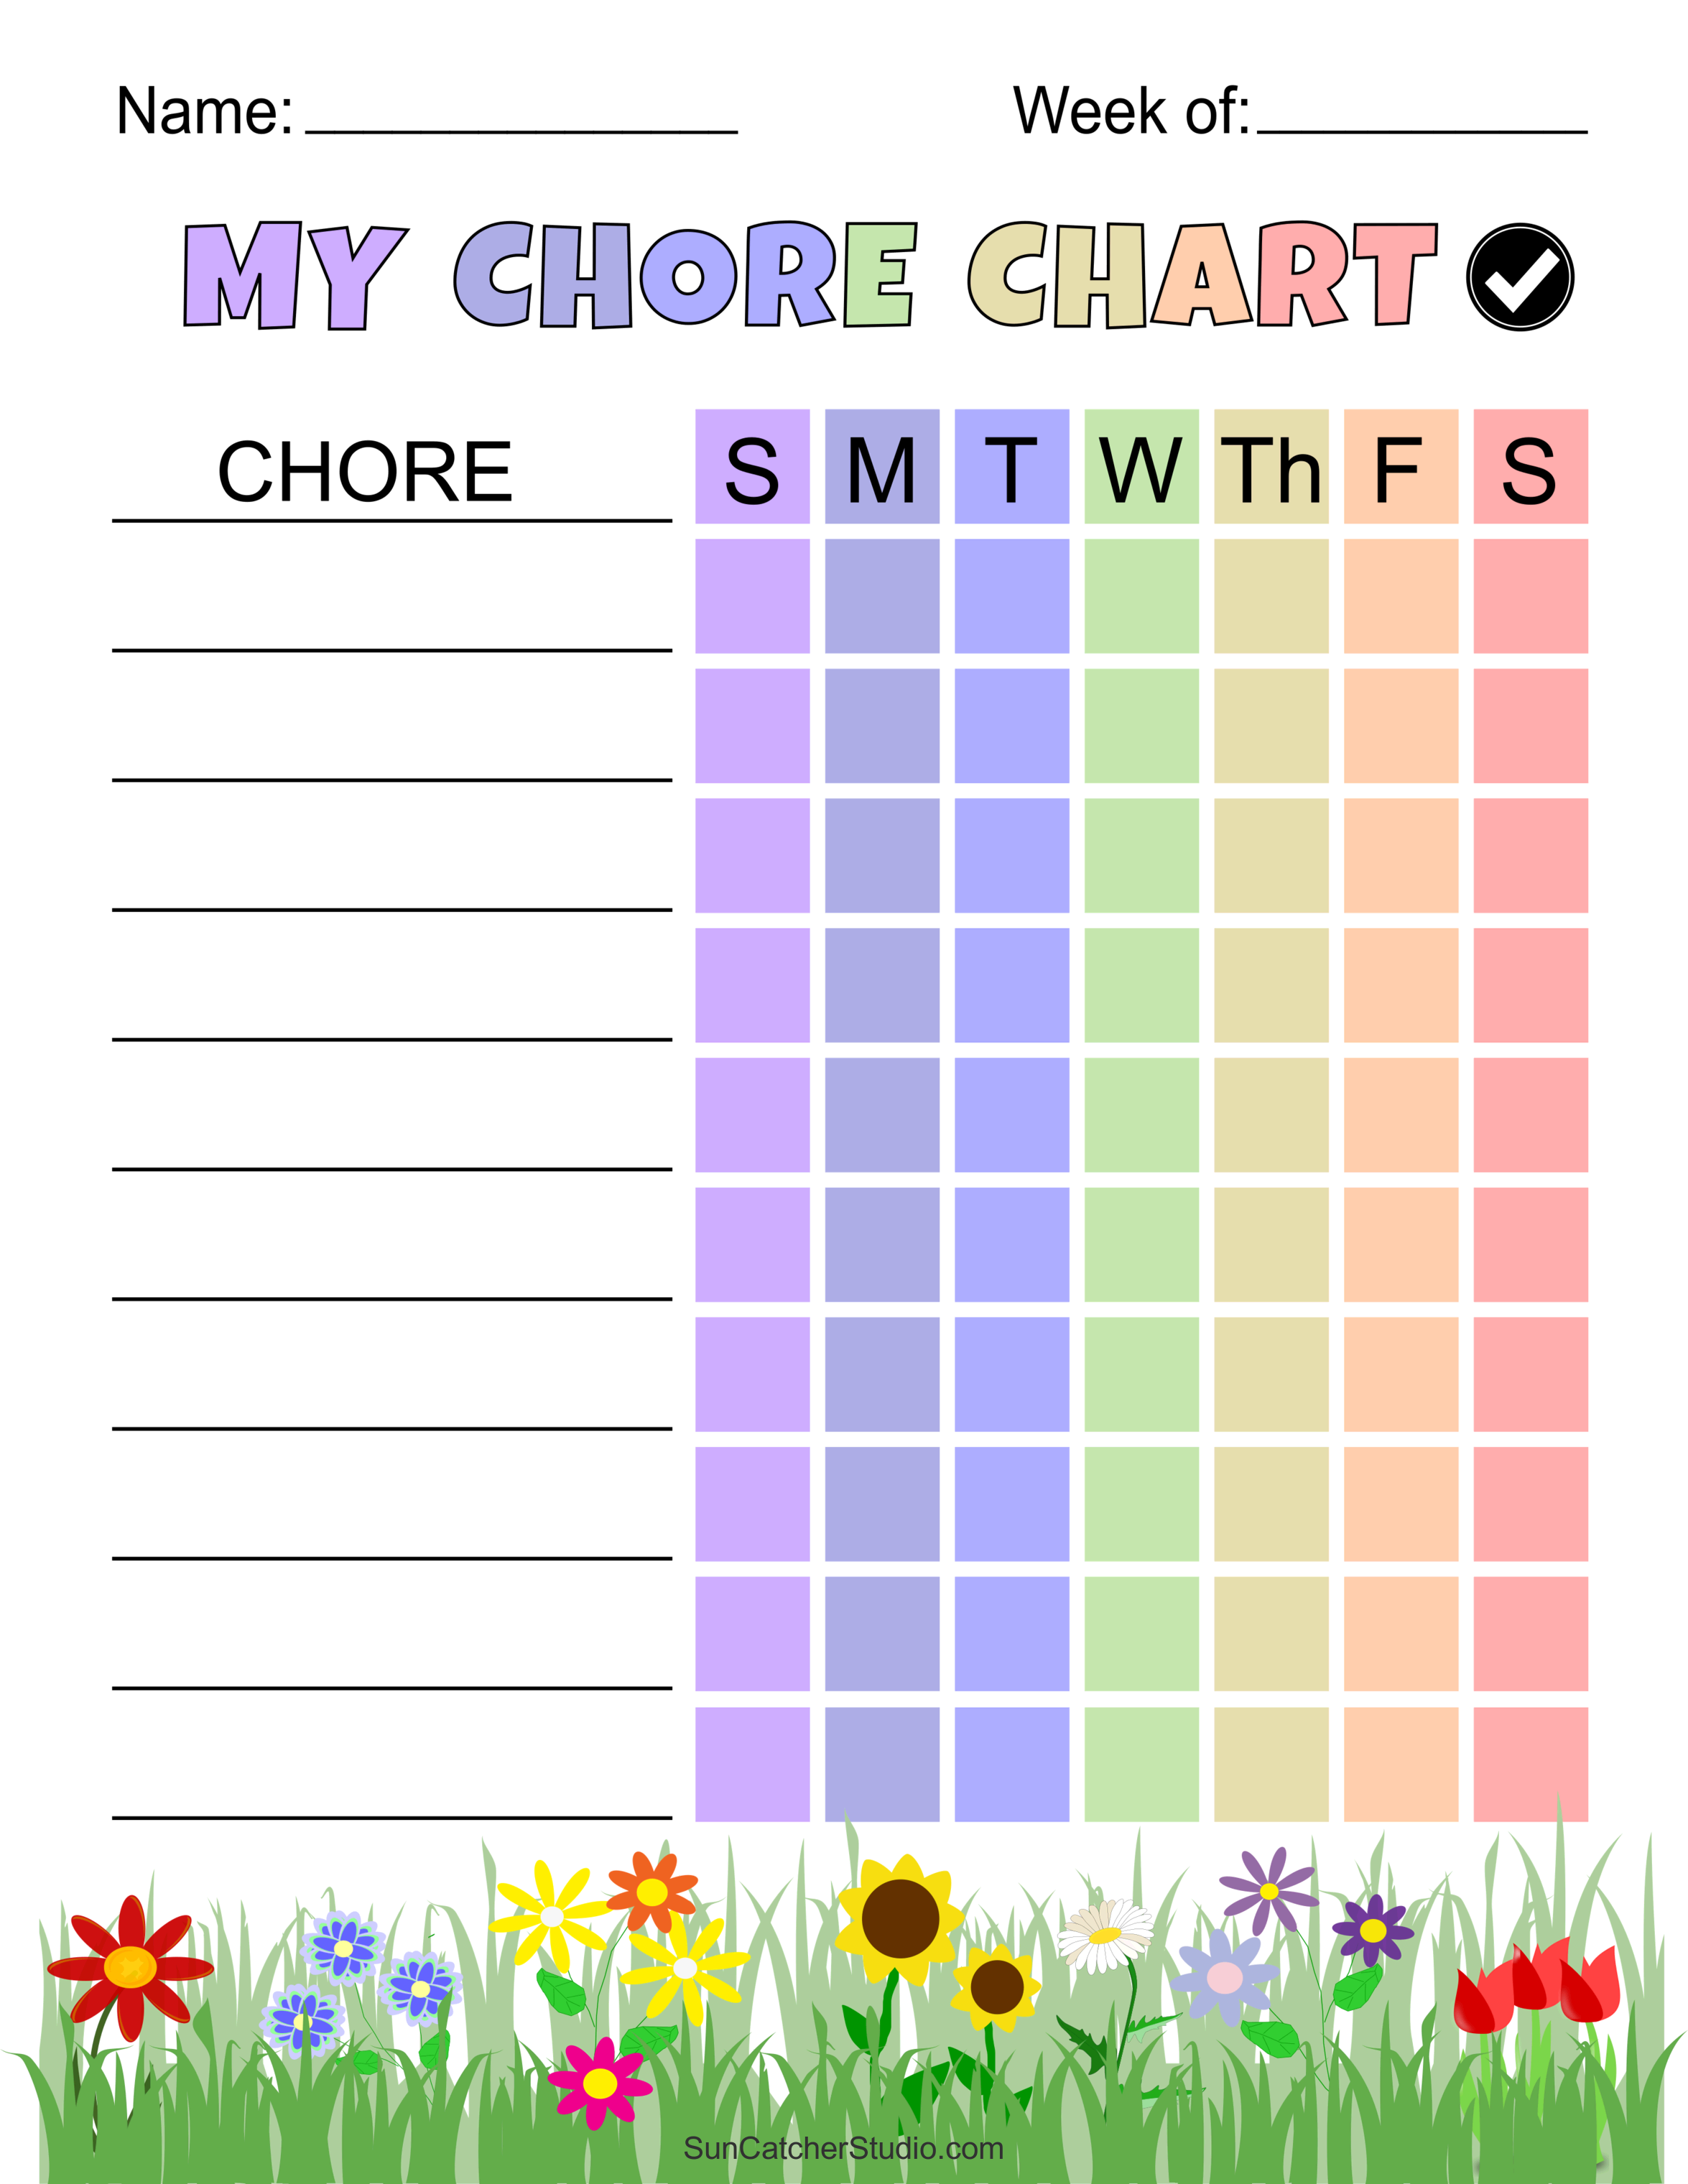 Weekly Chore Checklist Template